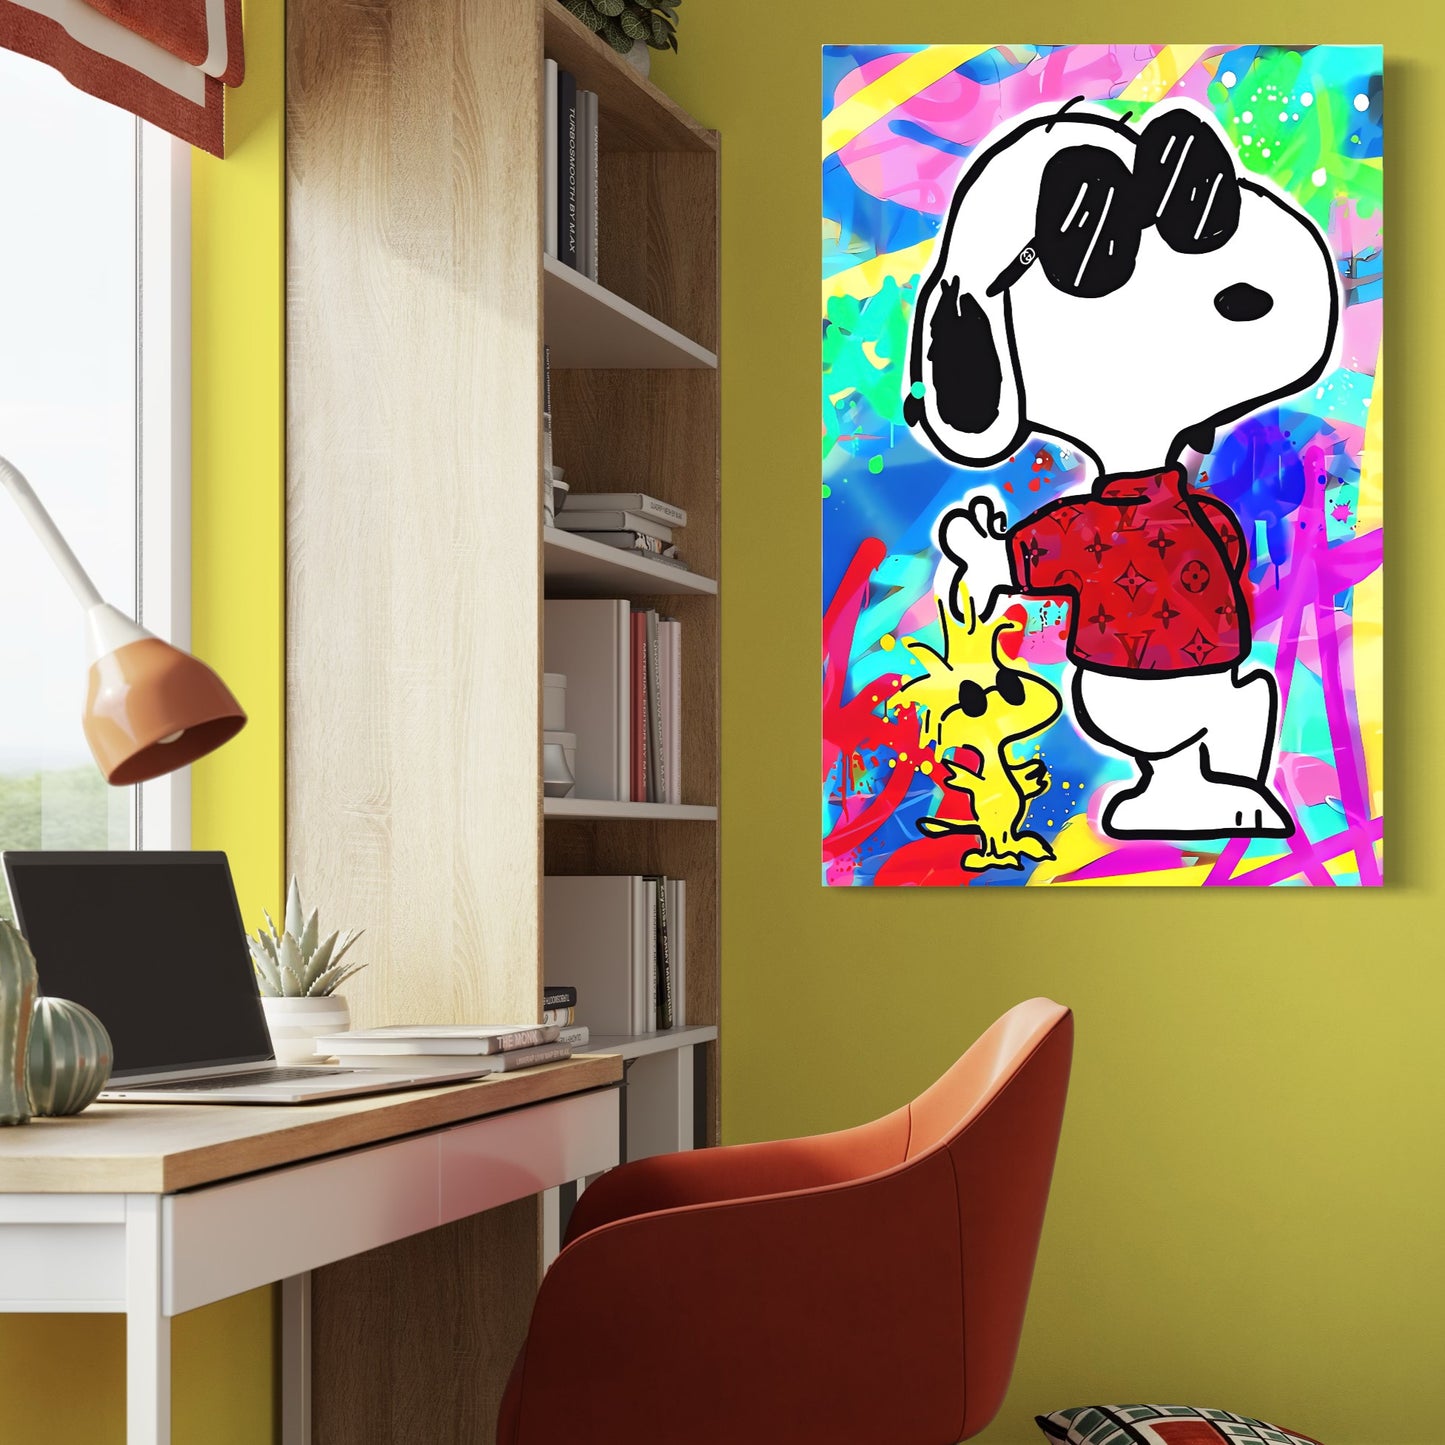 Snoopy and woodstock